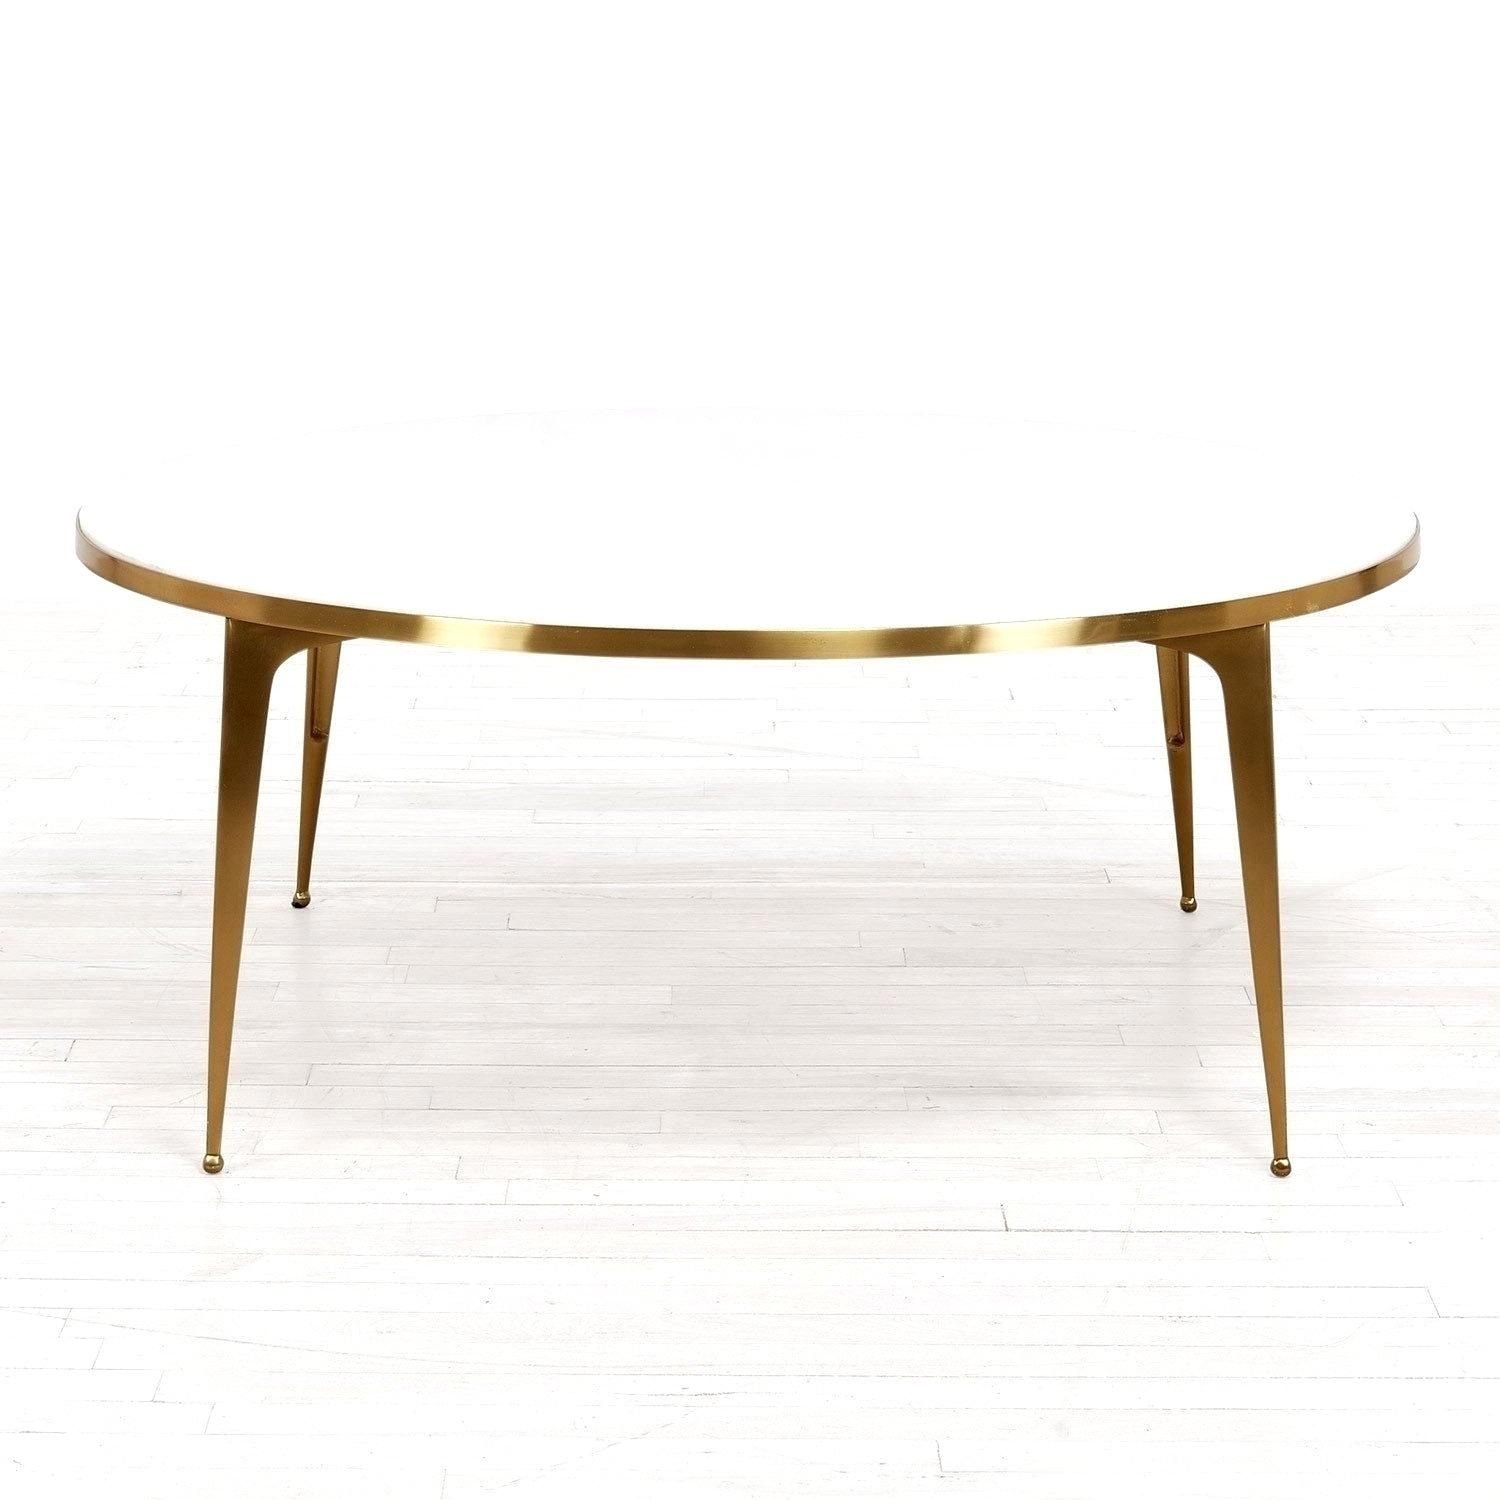 Delightful Audacious Dining Table Brass Small L Brass Coffee Table Pertaining To Slab Large Marble Coffee Tables With Brass Base (View 29 of 30)